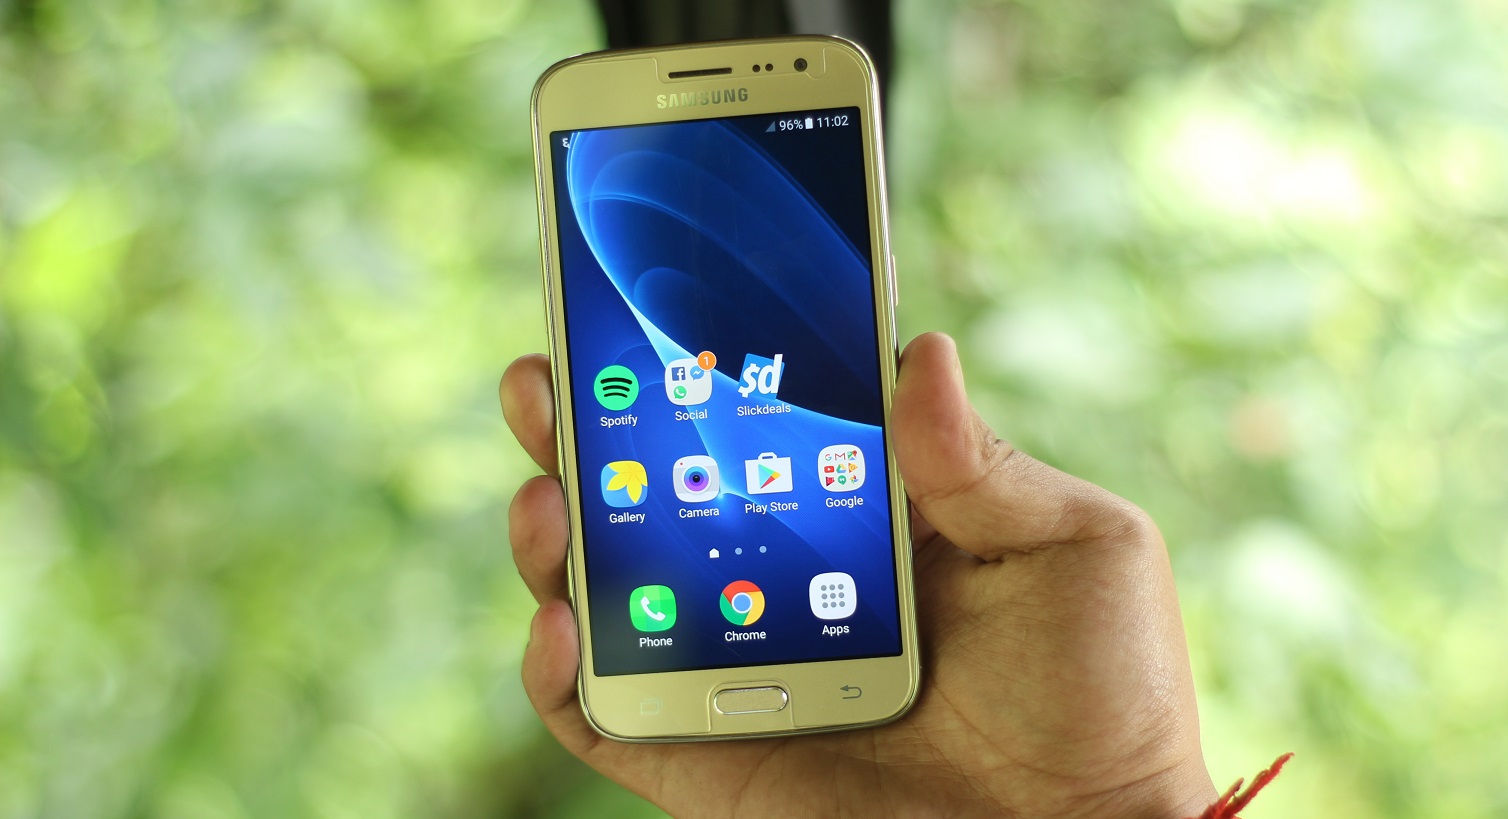 Samsung Galaxy J2 2016 price in nepal with specs